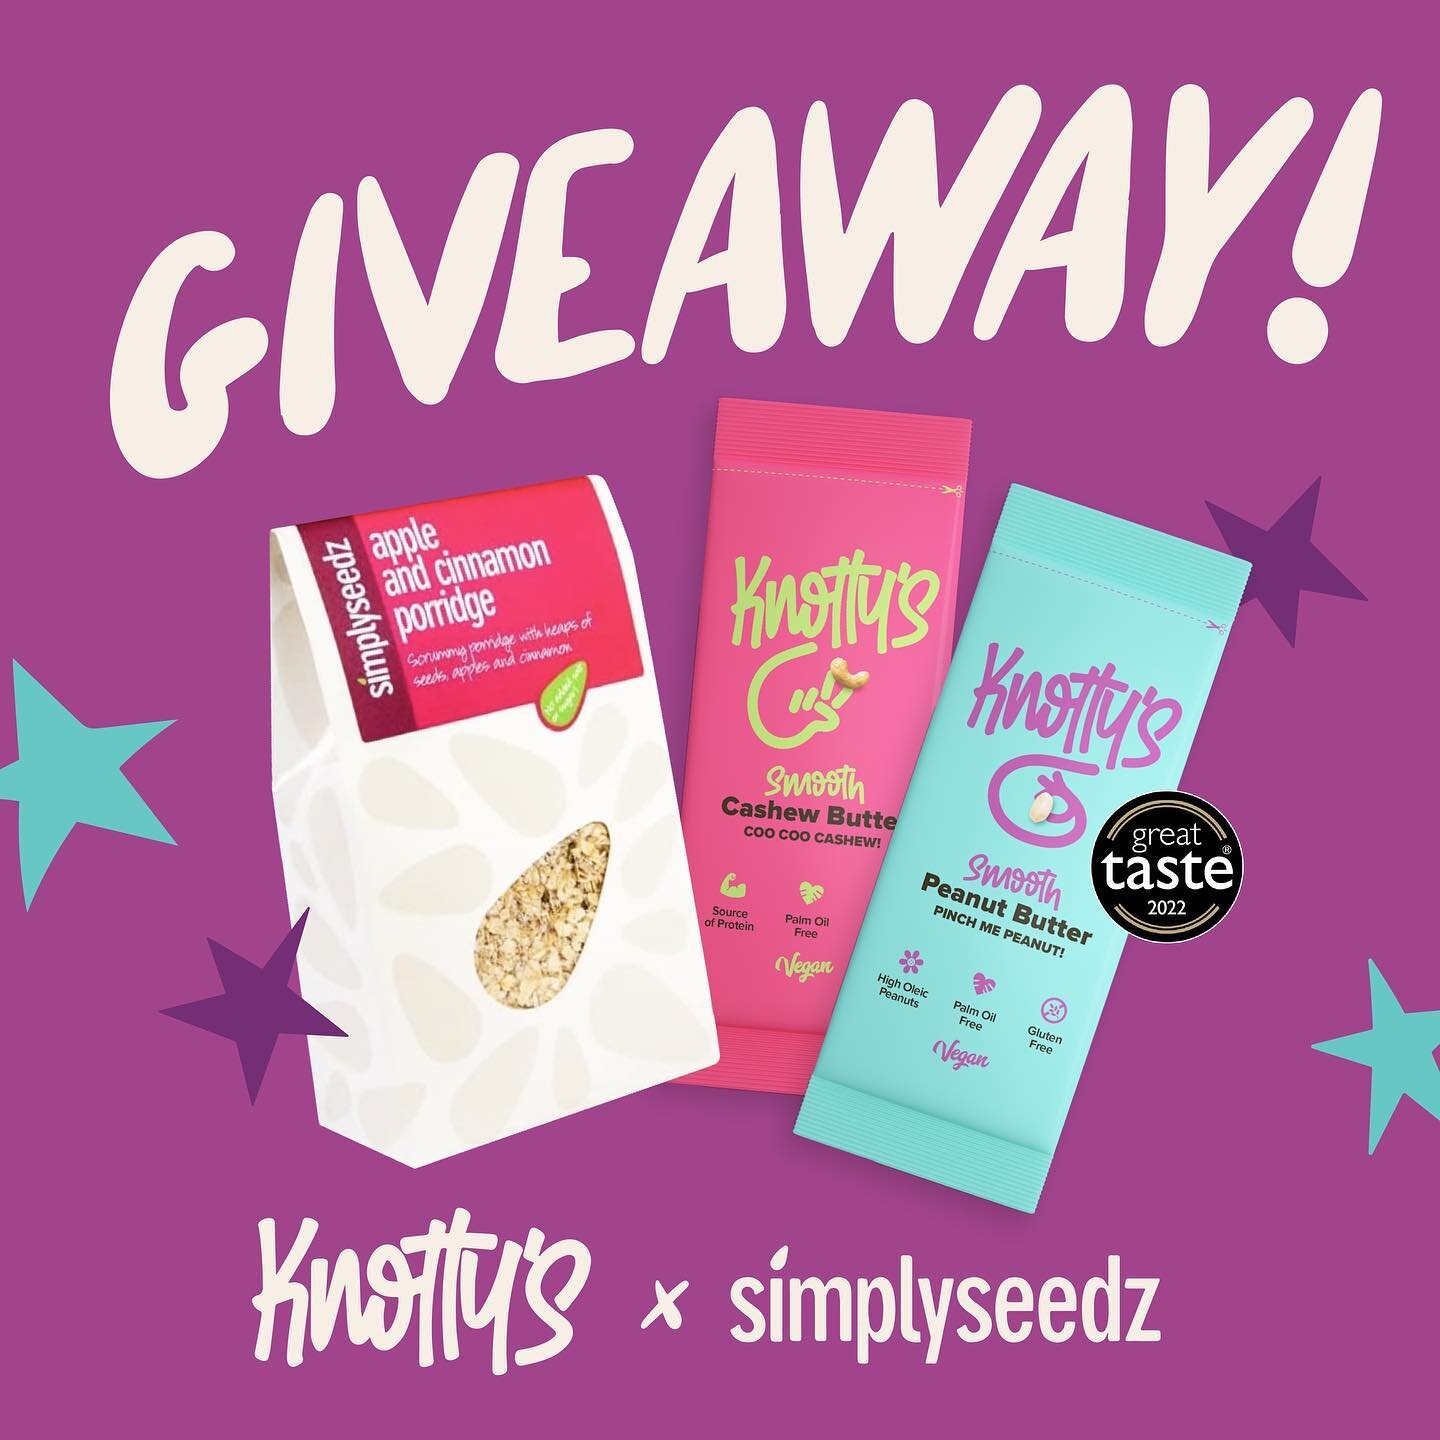 ⭐️ GIVEAWAY! ⭐️ 

We&rsquo;ve teamed up with our friends over at @simplyseedz to giveaway this super tasty breakfast bundle!

What&rsquo;s inside:
🥜 5x Knottys Smooth PB Sachets
🥜 5x Knottys Cashew Butter Sachets
🍎 1x Simplyseedz Apple &amp; Cinna